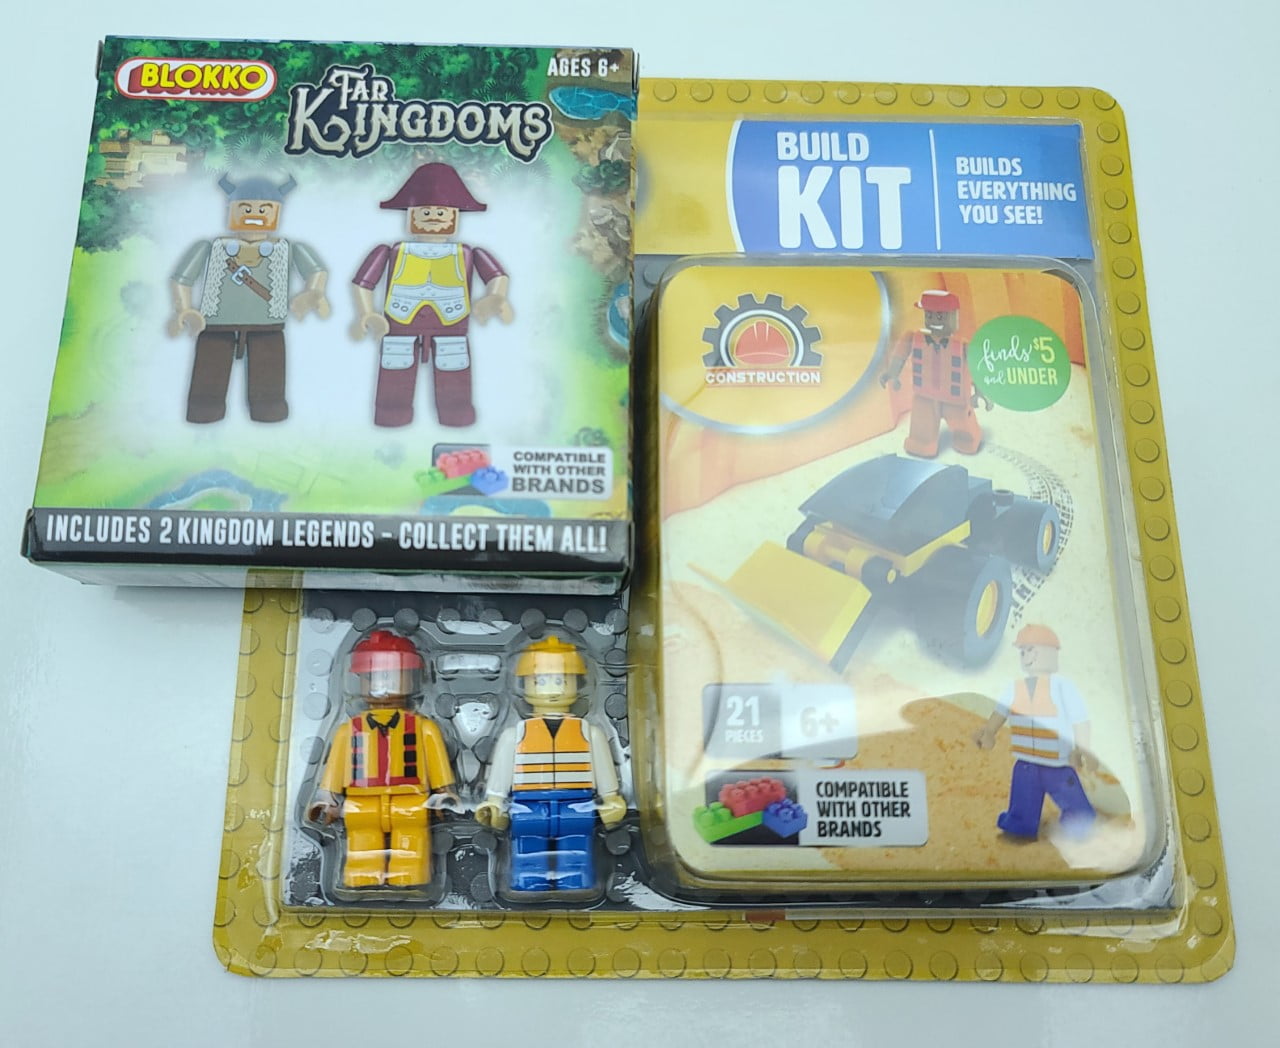 Blokko 20 Pk Mini Figure Gift Set Compatible With Other Major Brands Age 6+